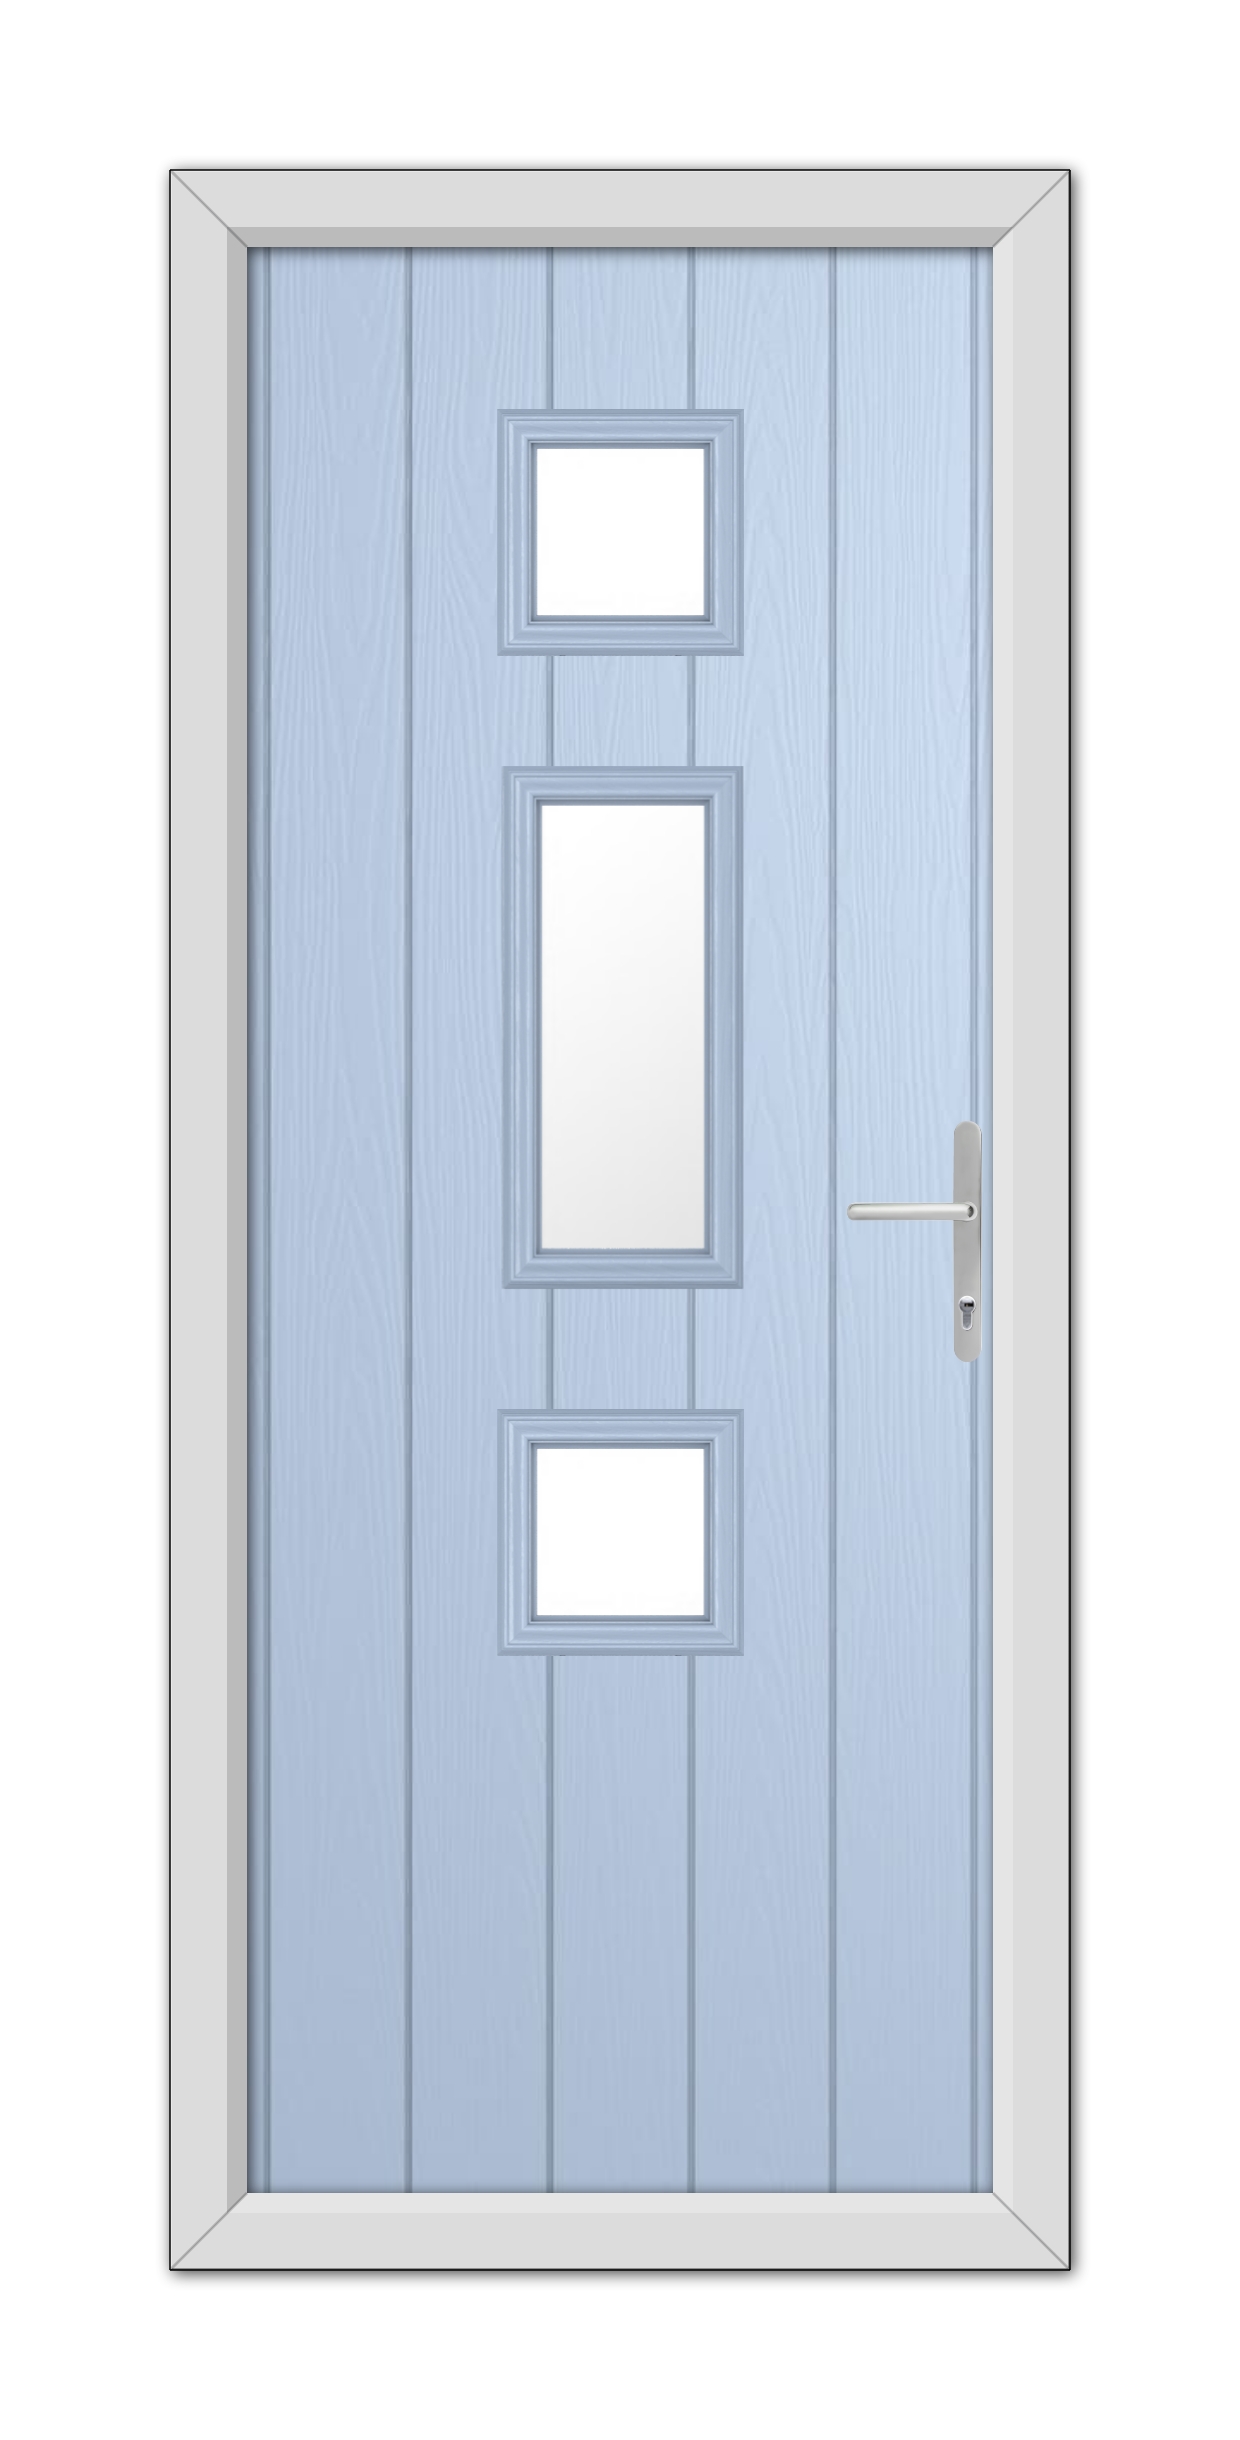 A Duck Egg Blue York Composite Door 48mm Timber Core with three rectangular windows and a modern silver handle, framed within a white doorframe.